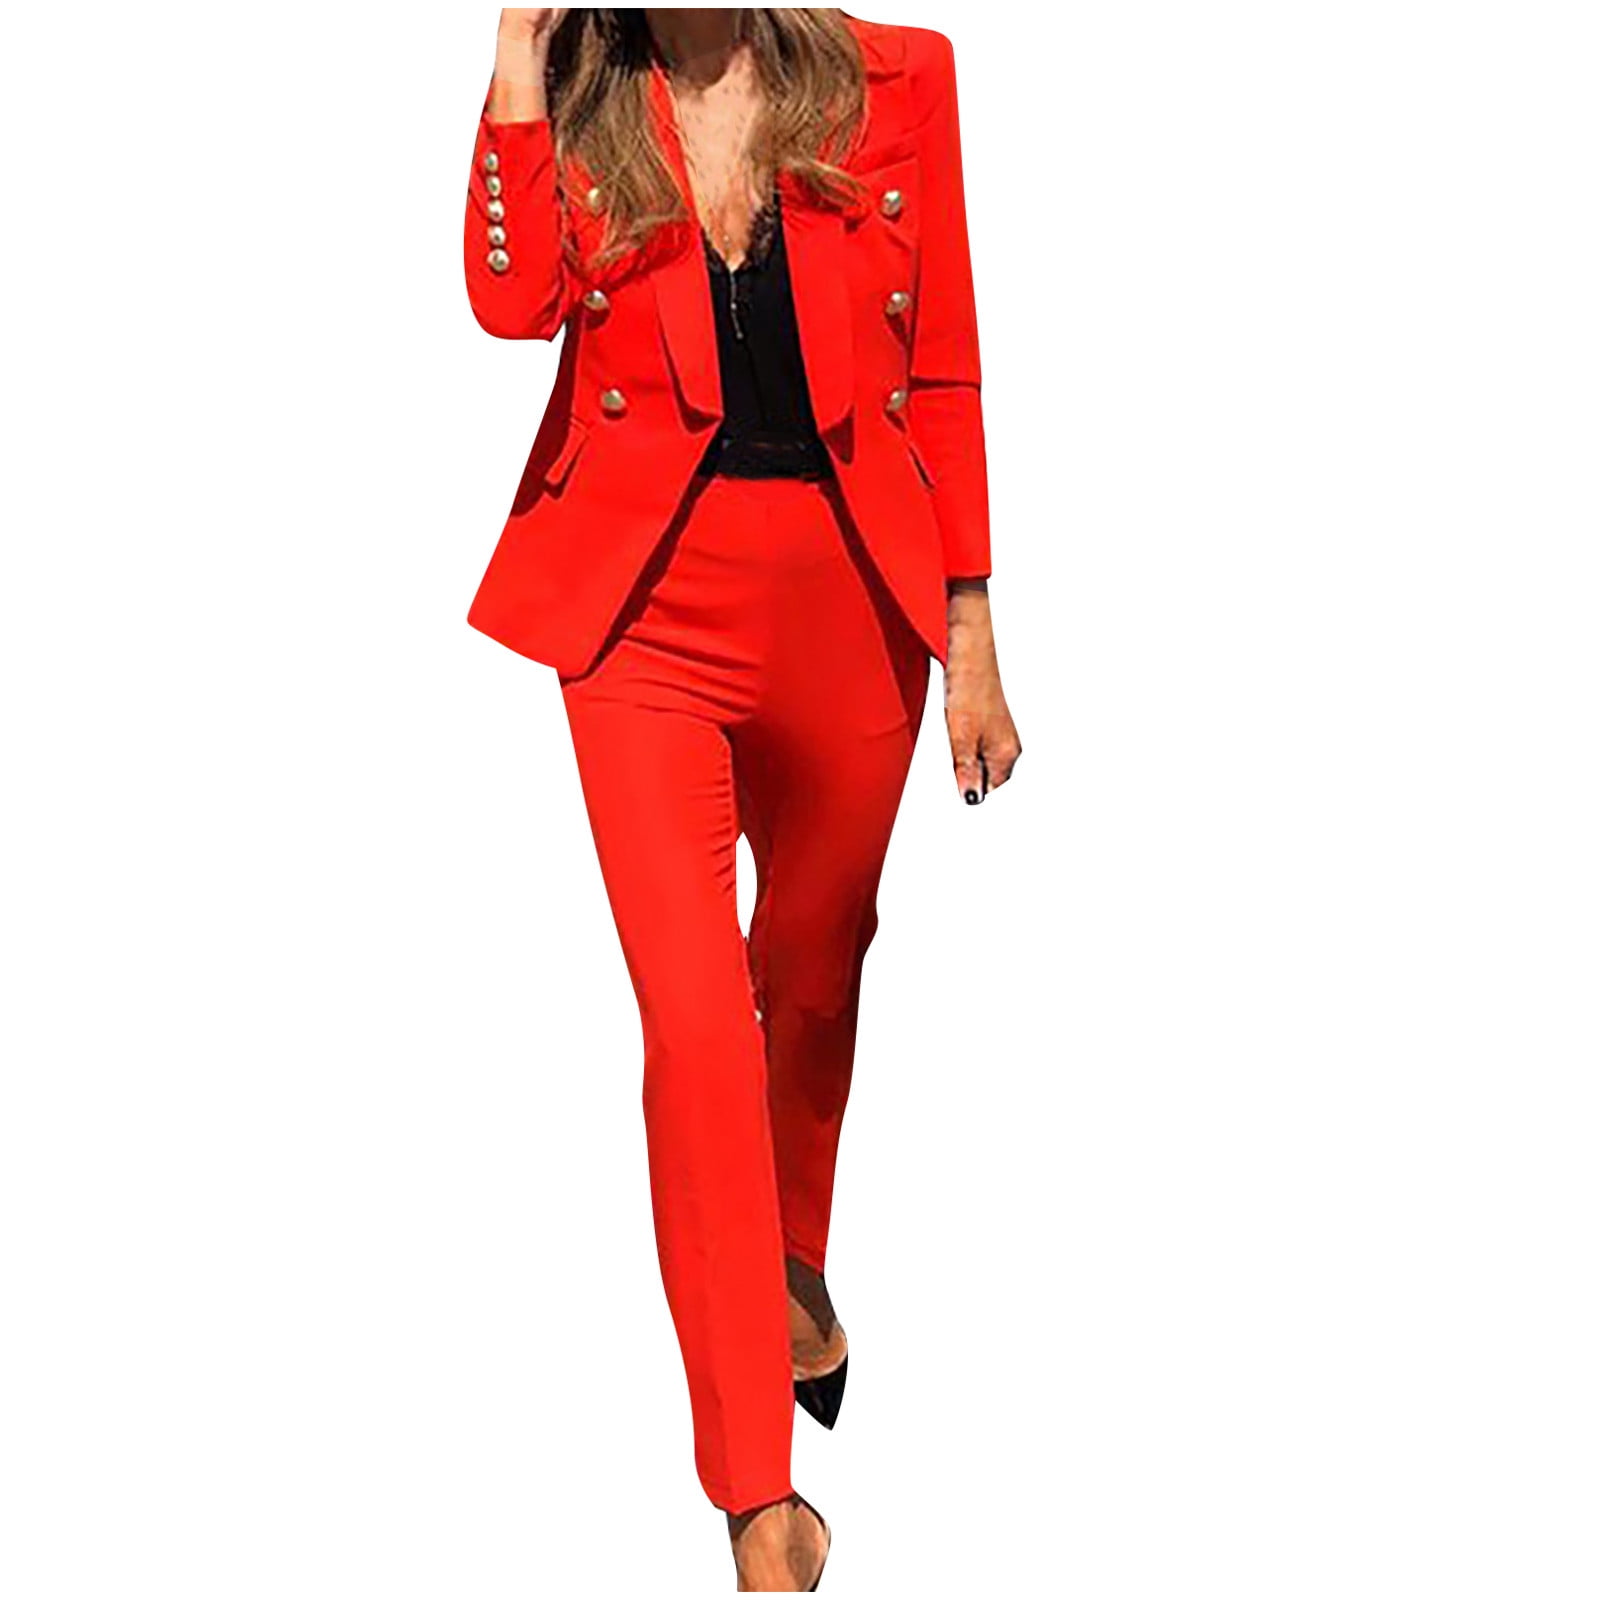 formal suits for women